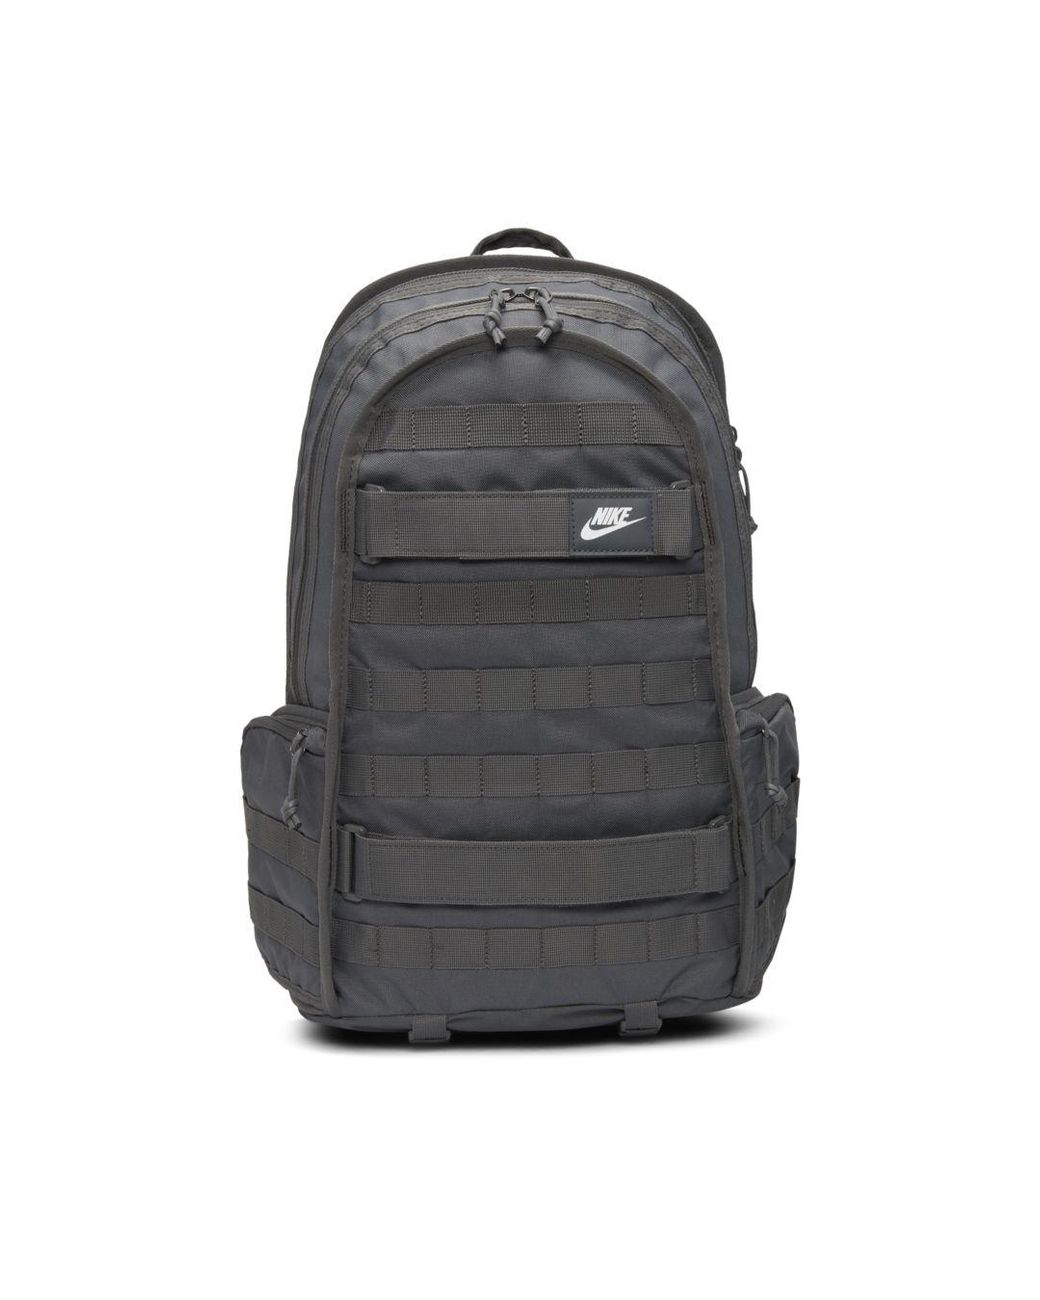 Nike Sportswear RPM Backpack Light Silver / Black / Anthracite